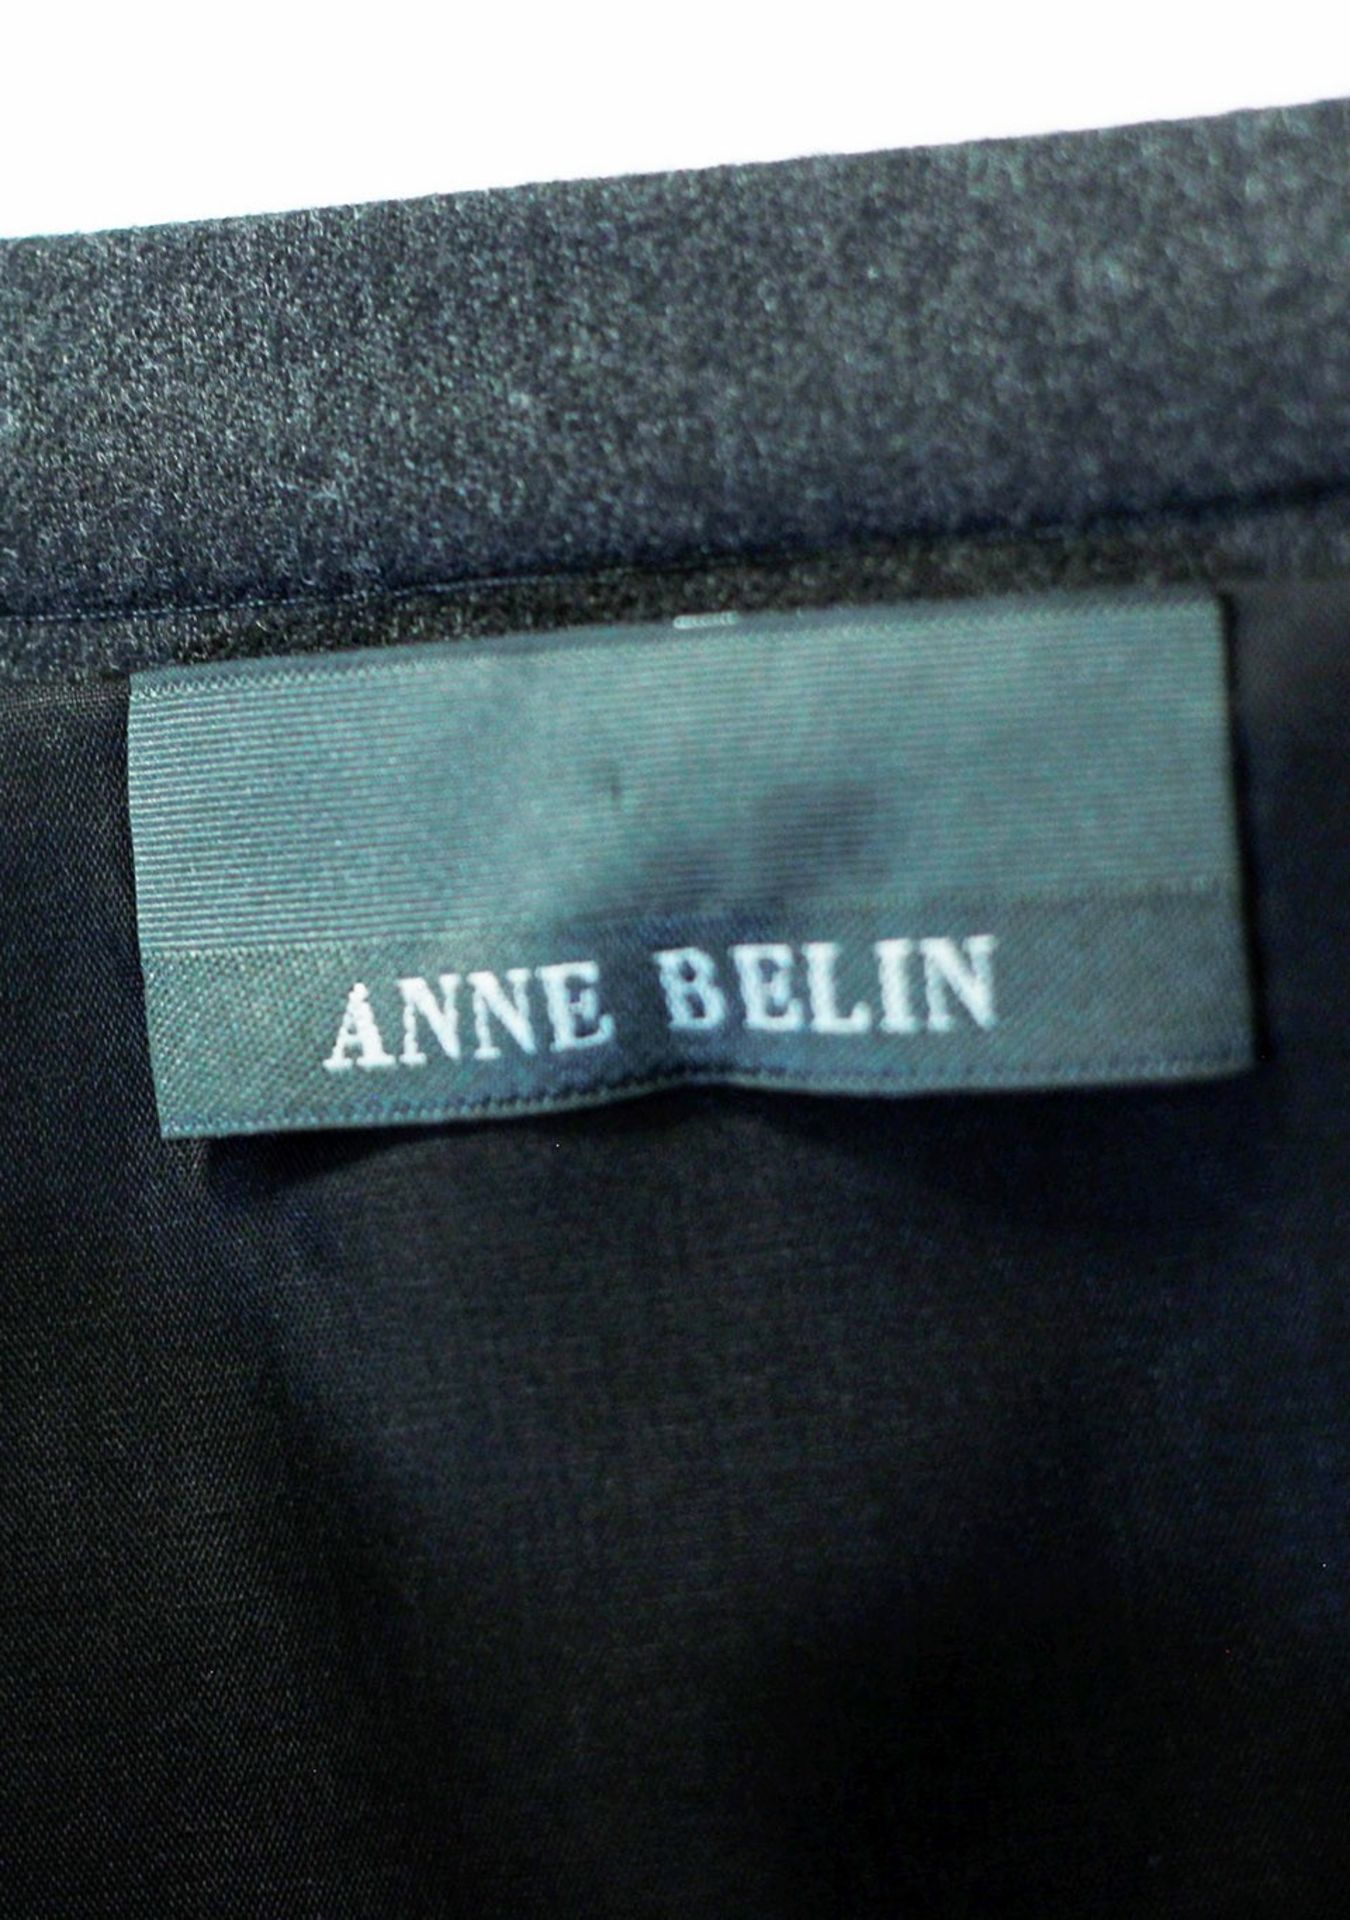 1 x Anne Belin Dark Grey Skirt - Size: 18 - Material: 100% Wool - From a High End Clothing - Image 2 of 9